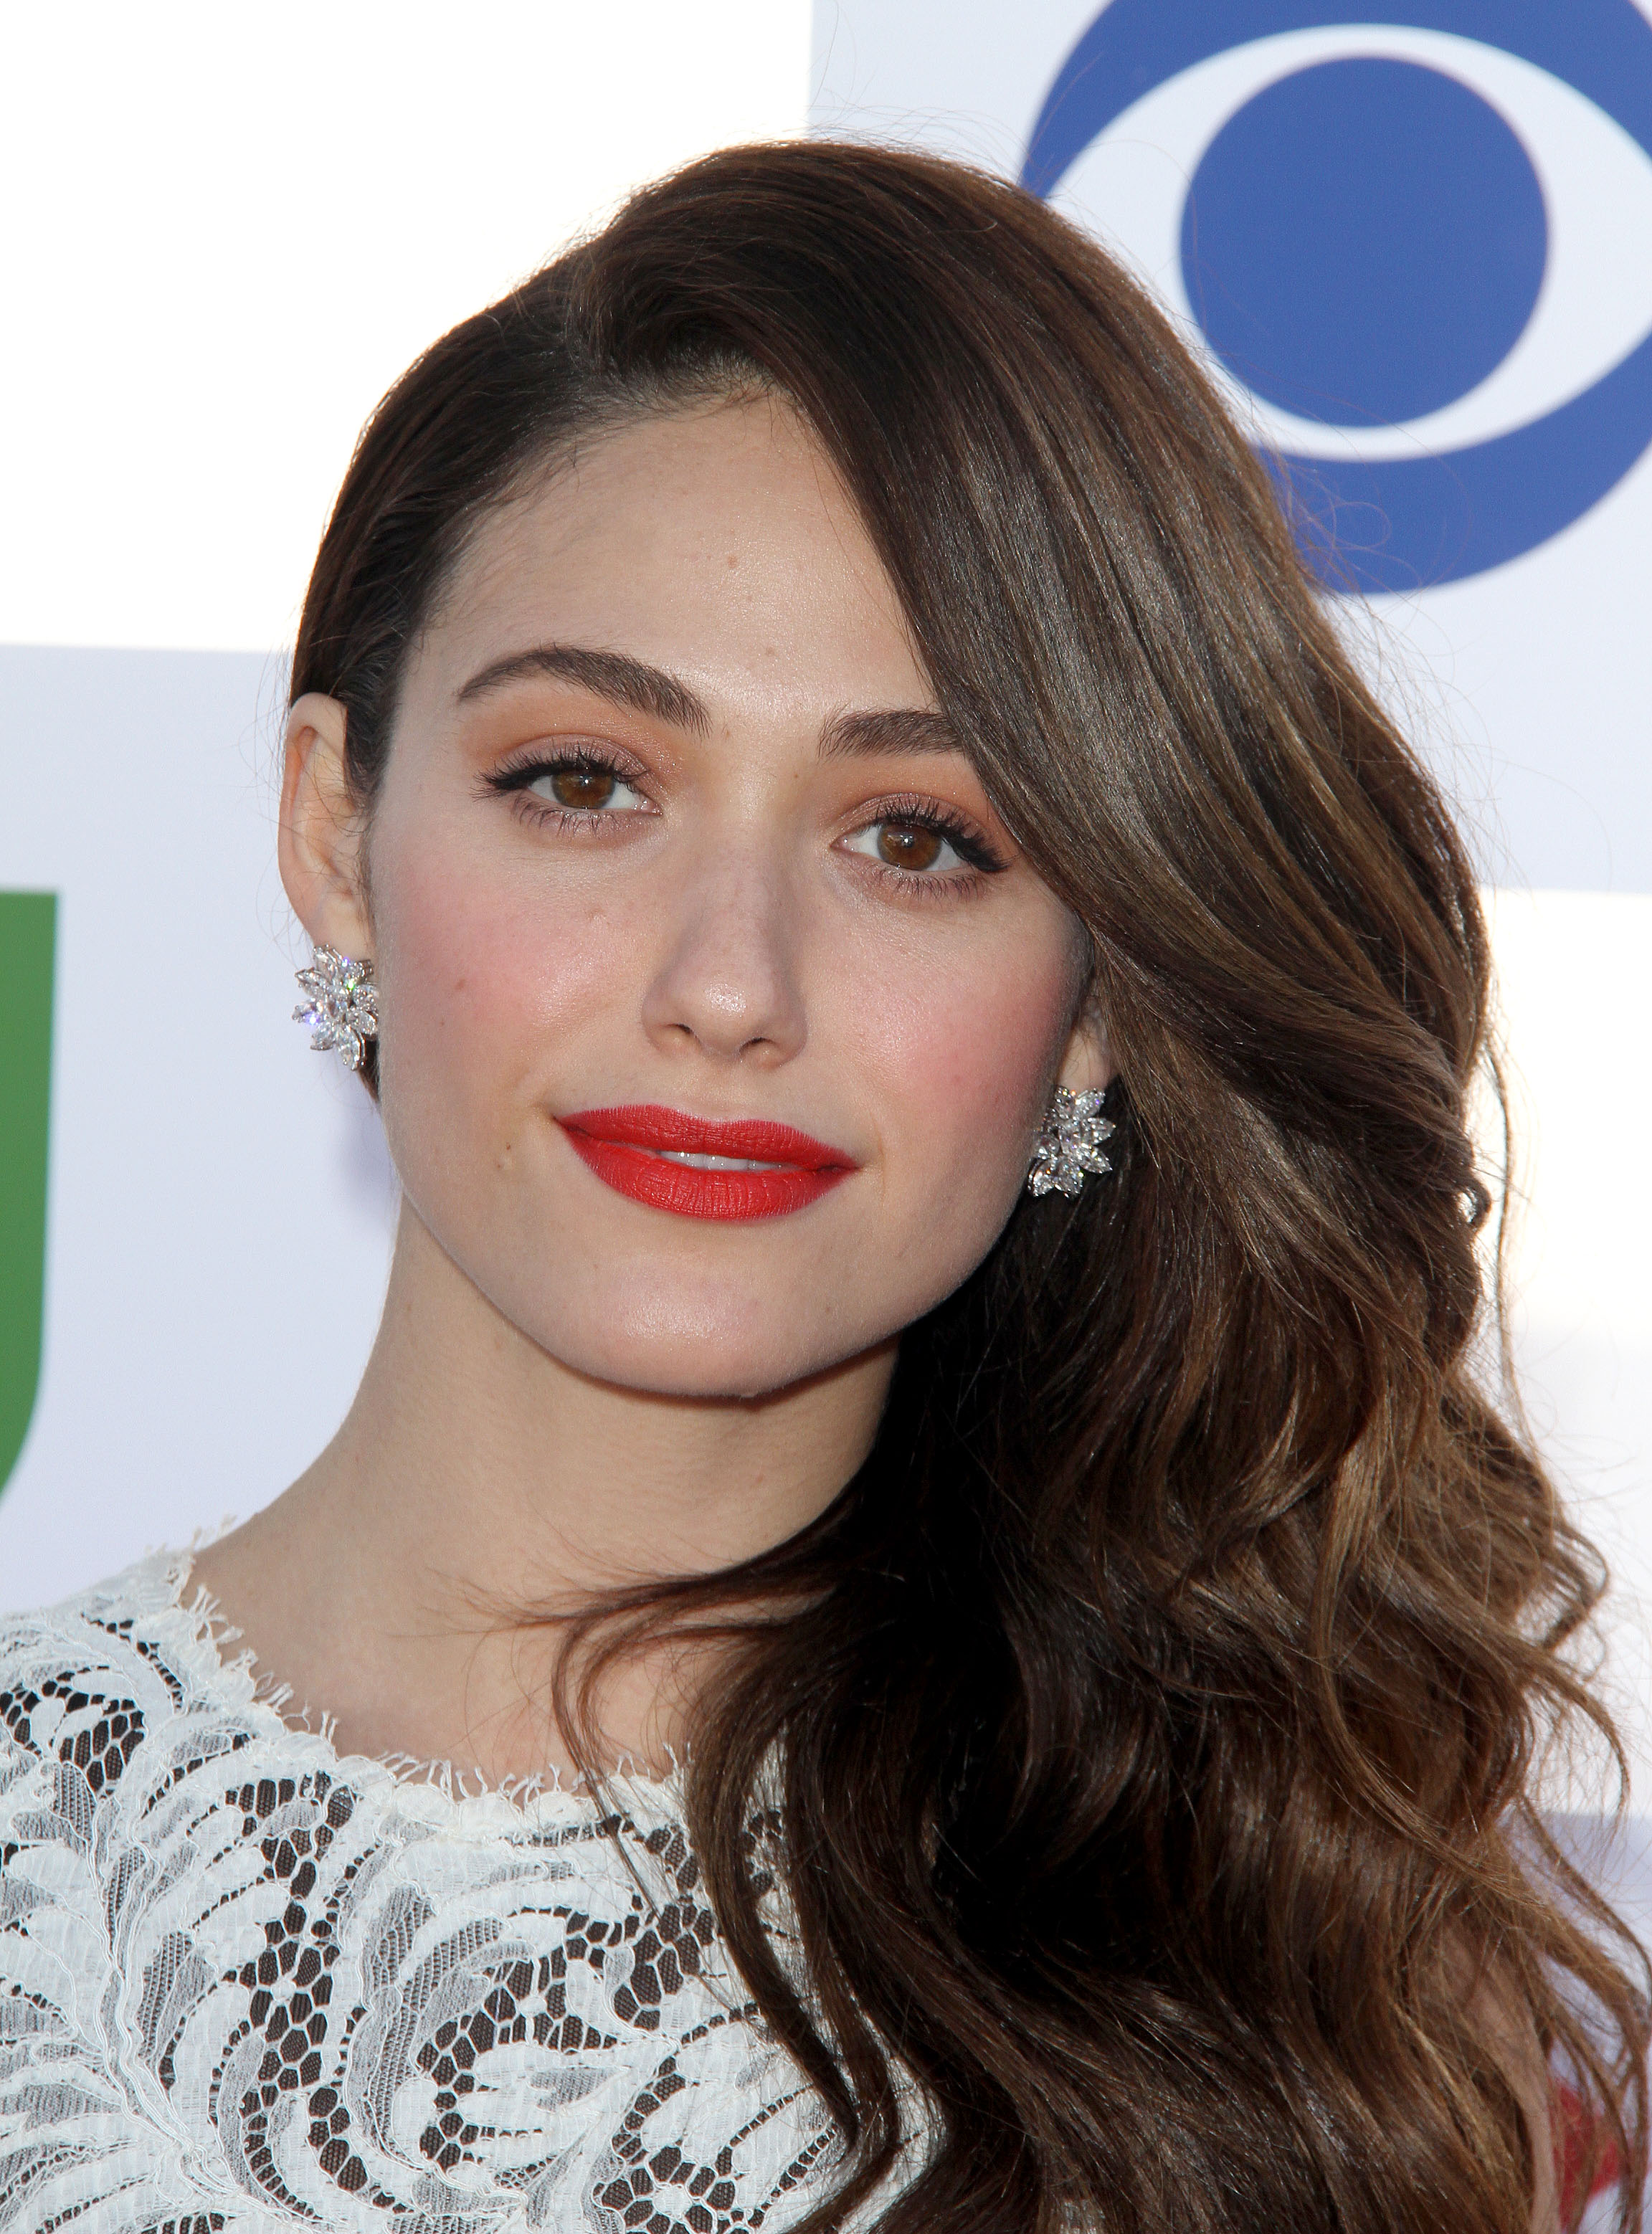 Emmy Rossum photo 321 of 1477 pics, wallpaper - photo #517463 - ThePlace2